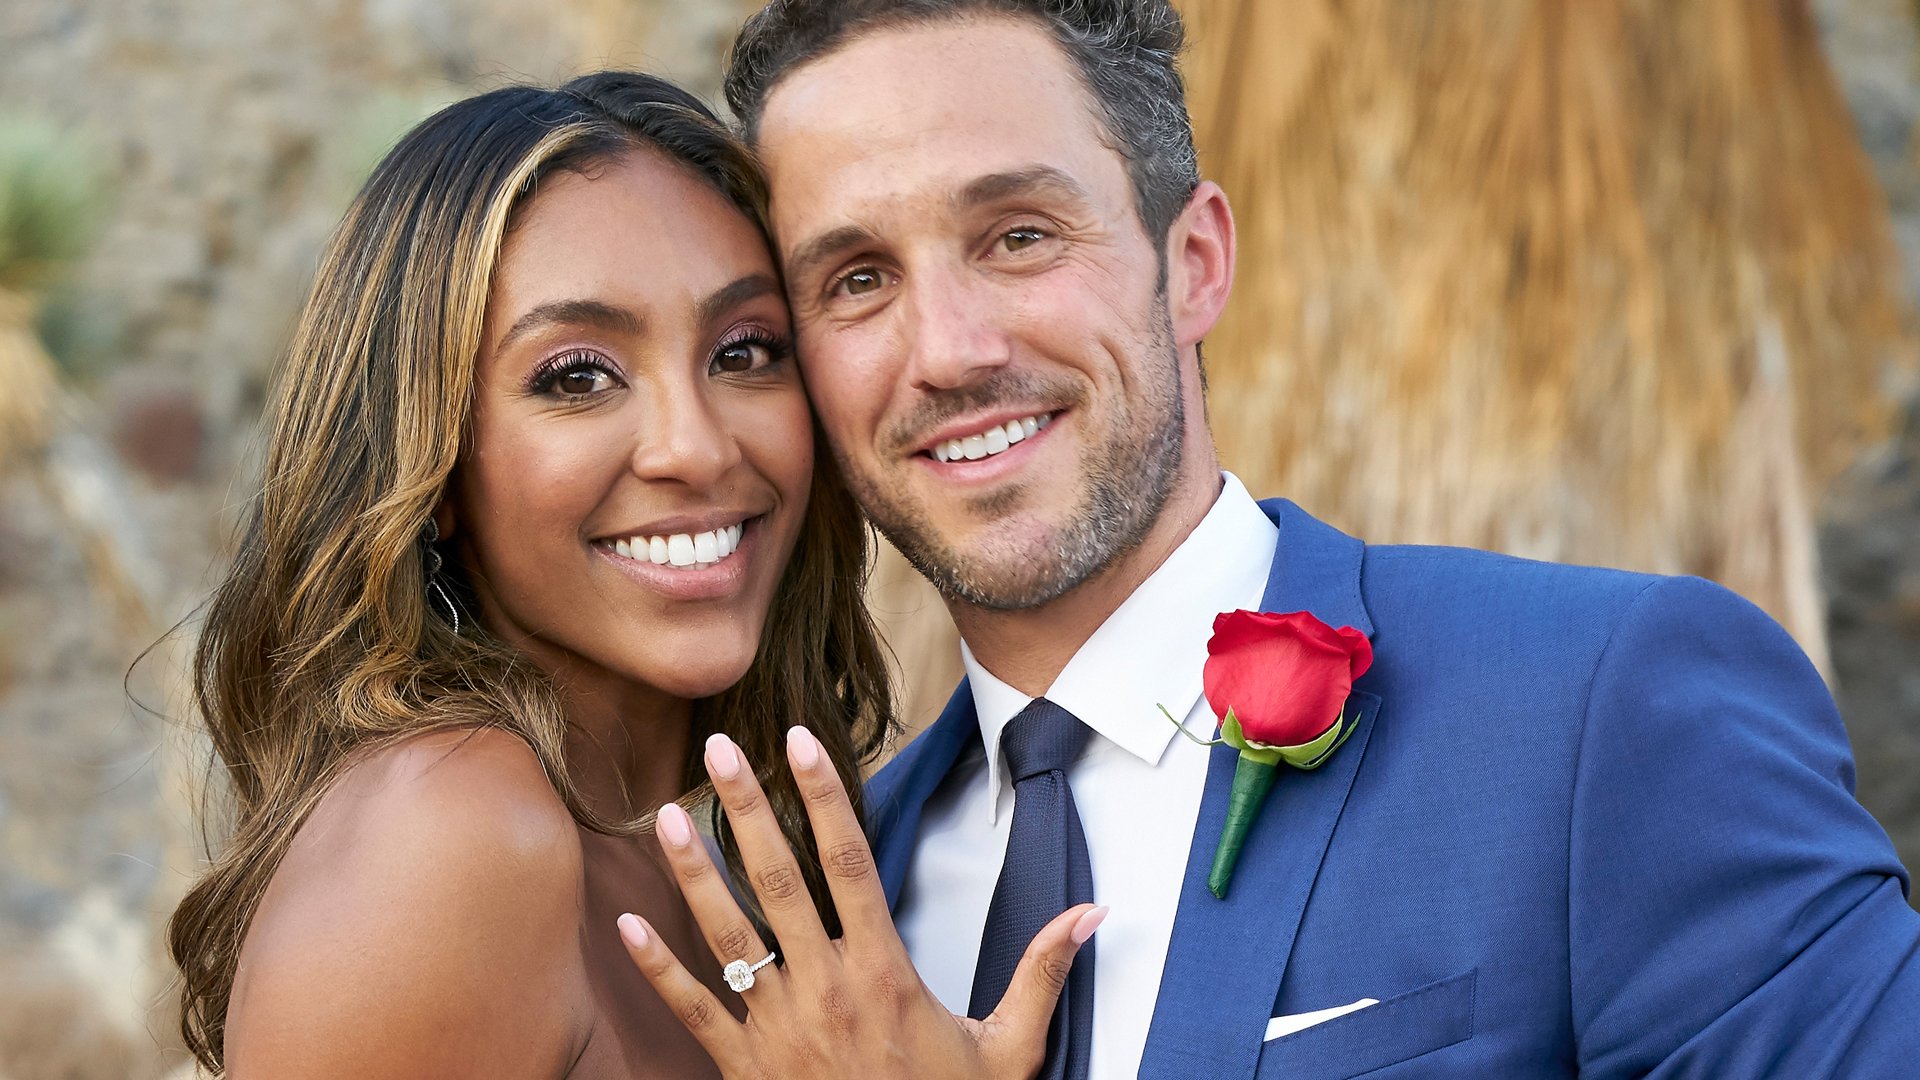 ‘The Bachelorette’: When Will Zac Clark and Tayshia Adams Get Married? The Reality Stars Teased Their Wedding Plans